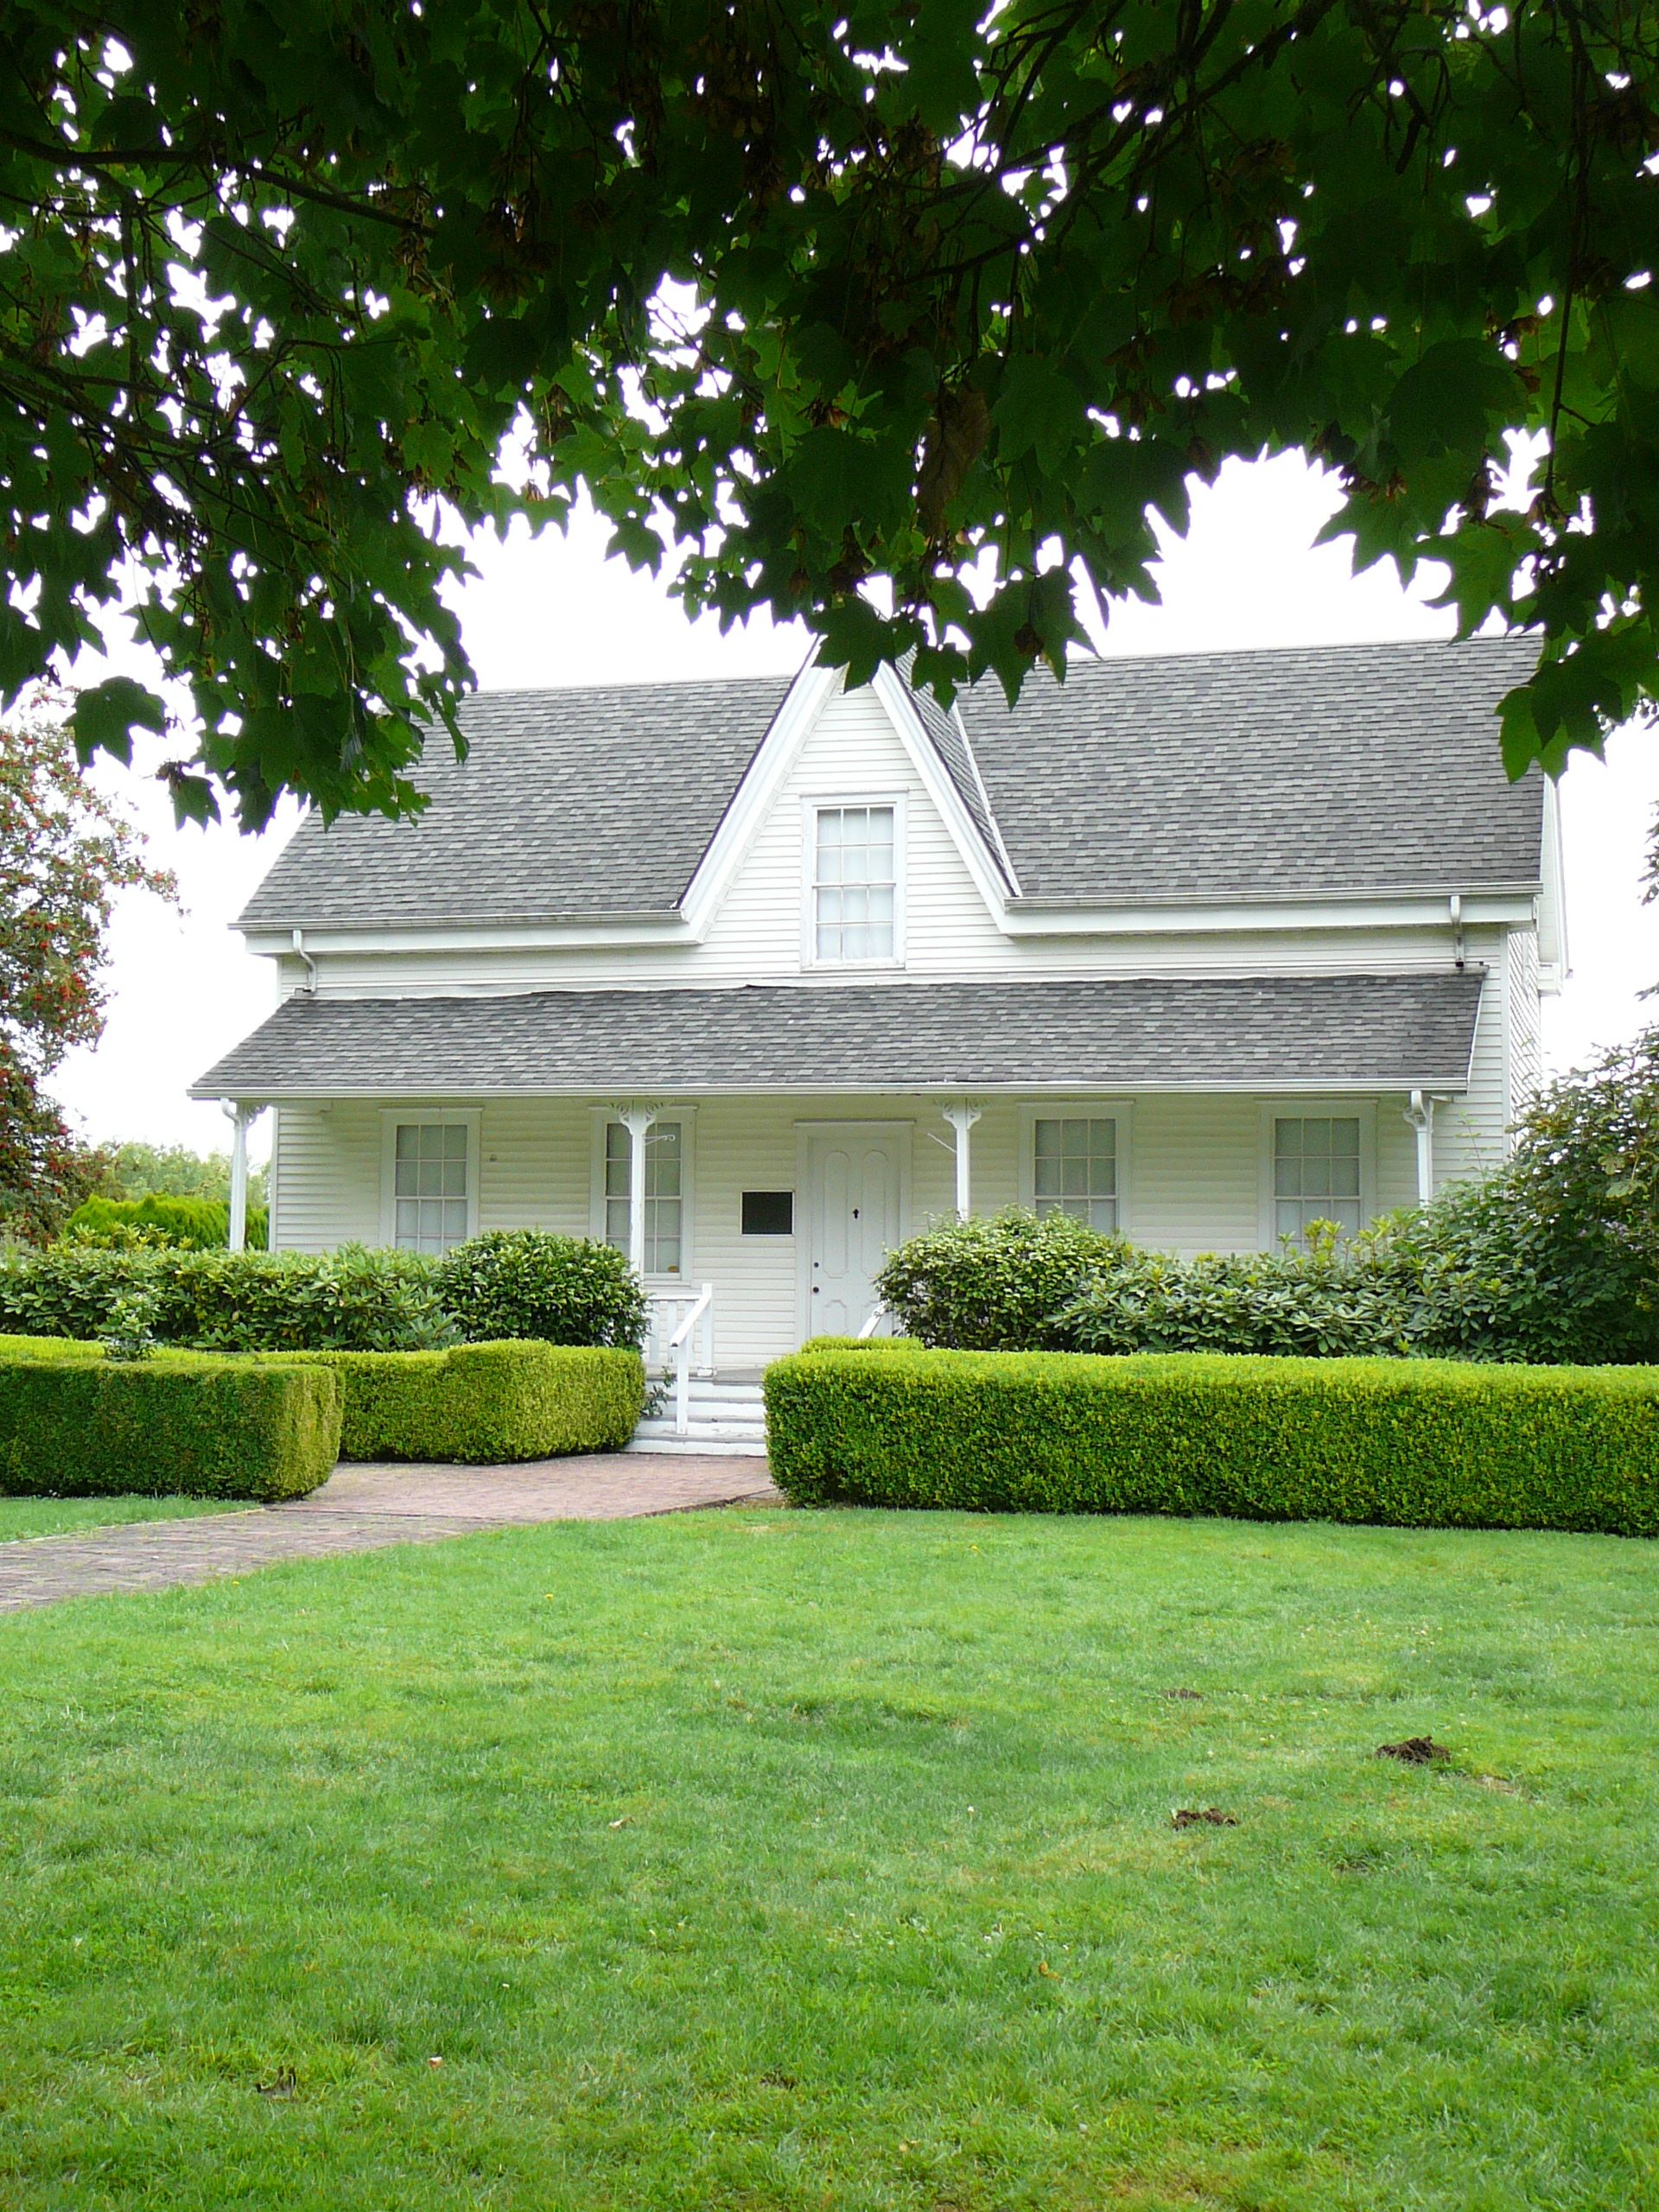 NEWELL HOUSE MUSEUM